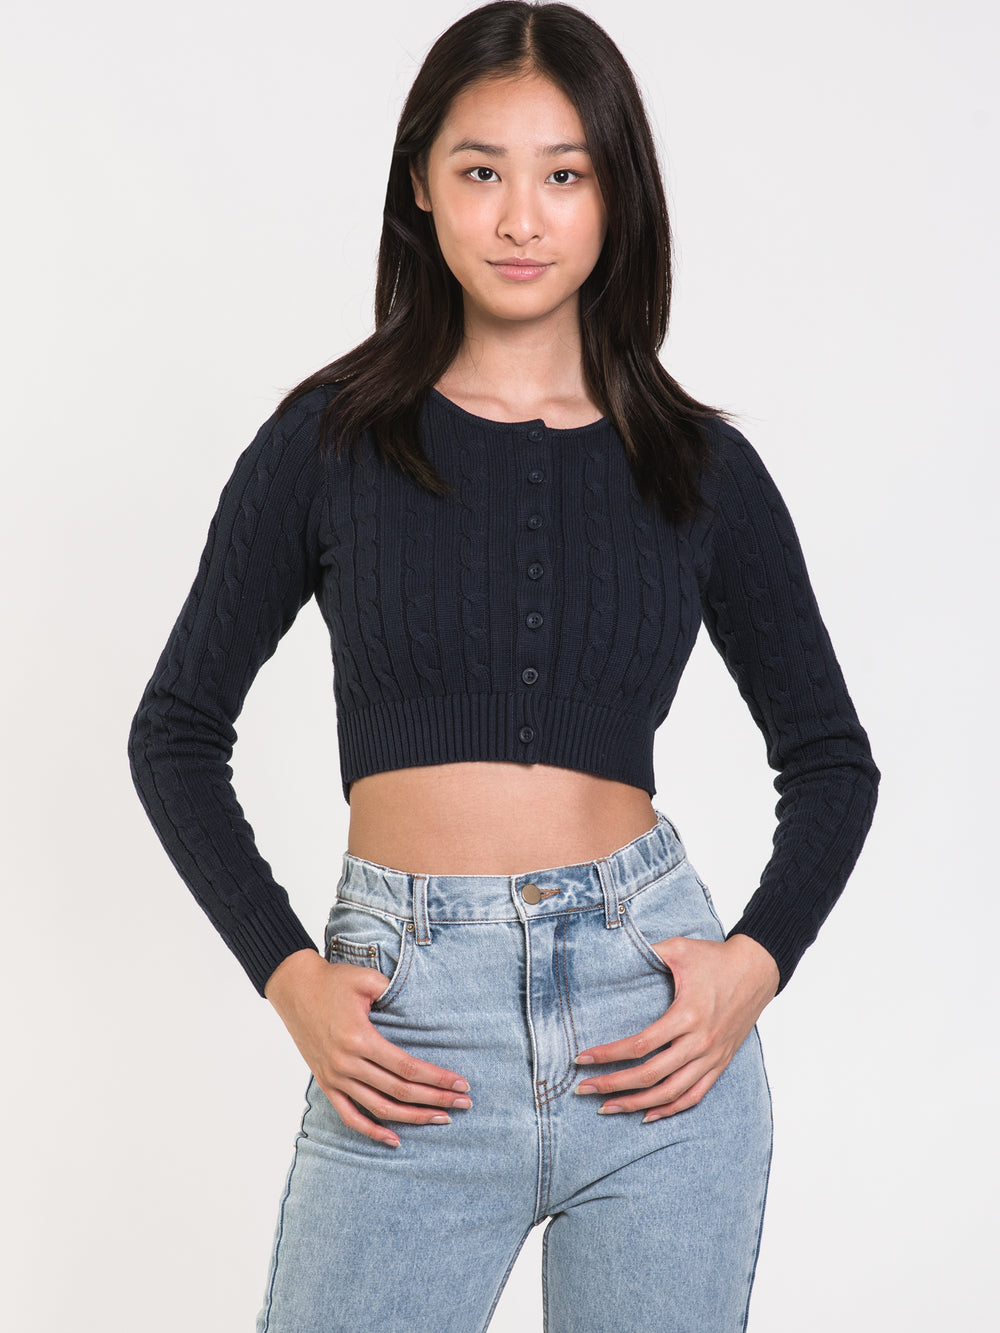 HARLOW JULIETTE CABLE CARDI - CLEARANCE